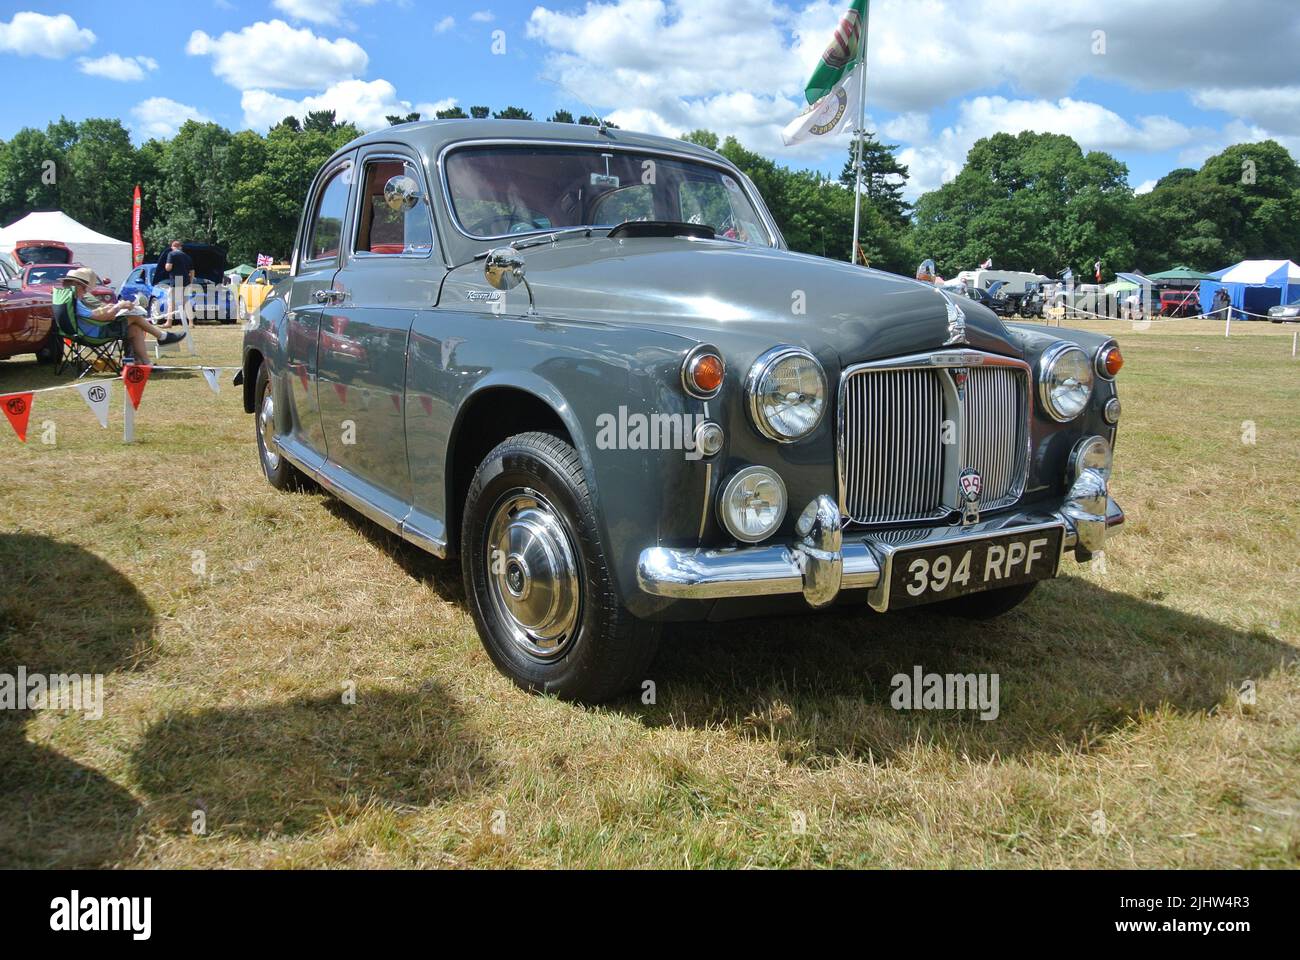 A 1960 Rover 100 parked on display at the 47th Historic Vehicle Gathering classic car show, Powderham, Devon, England, UK. Stock Photo